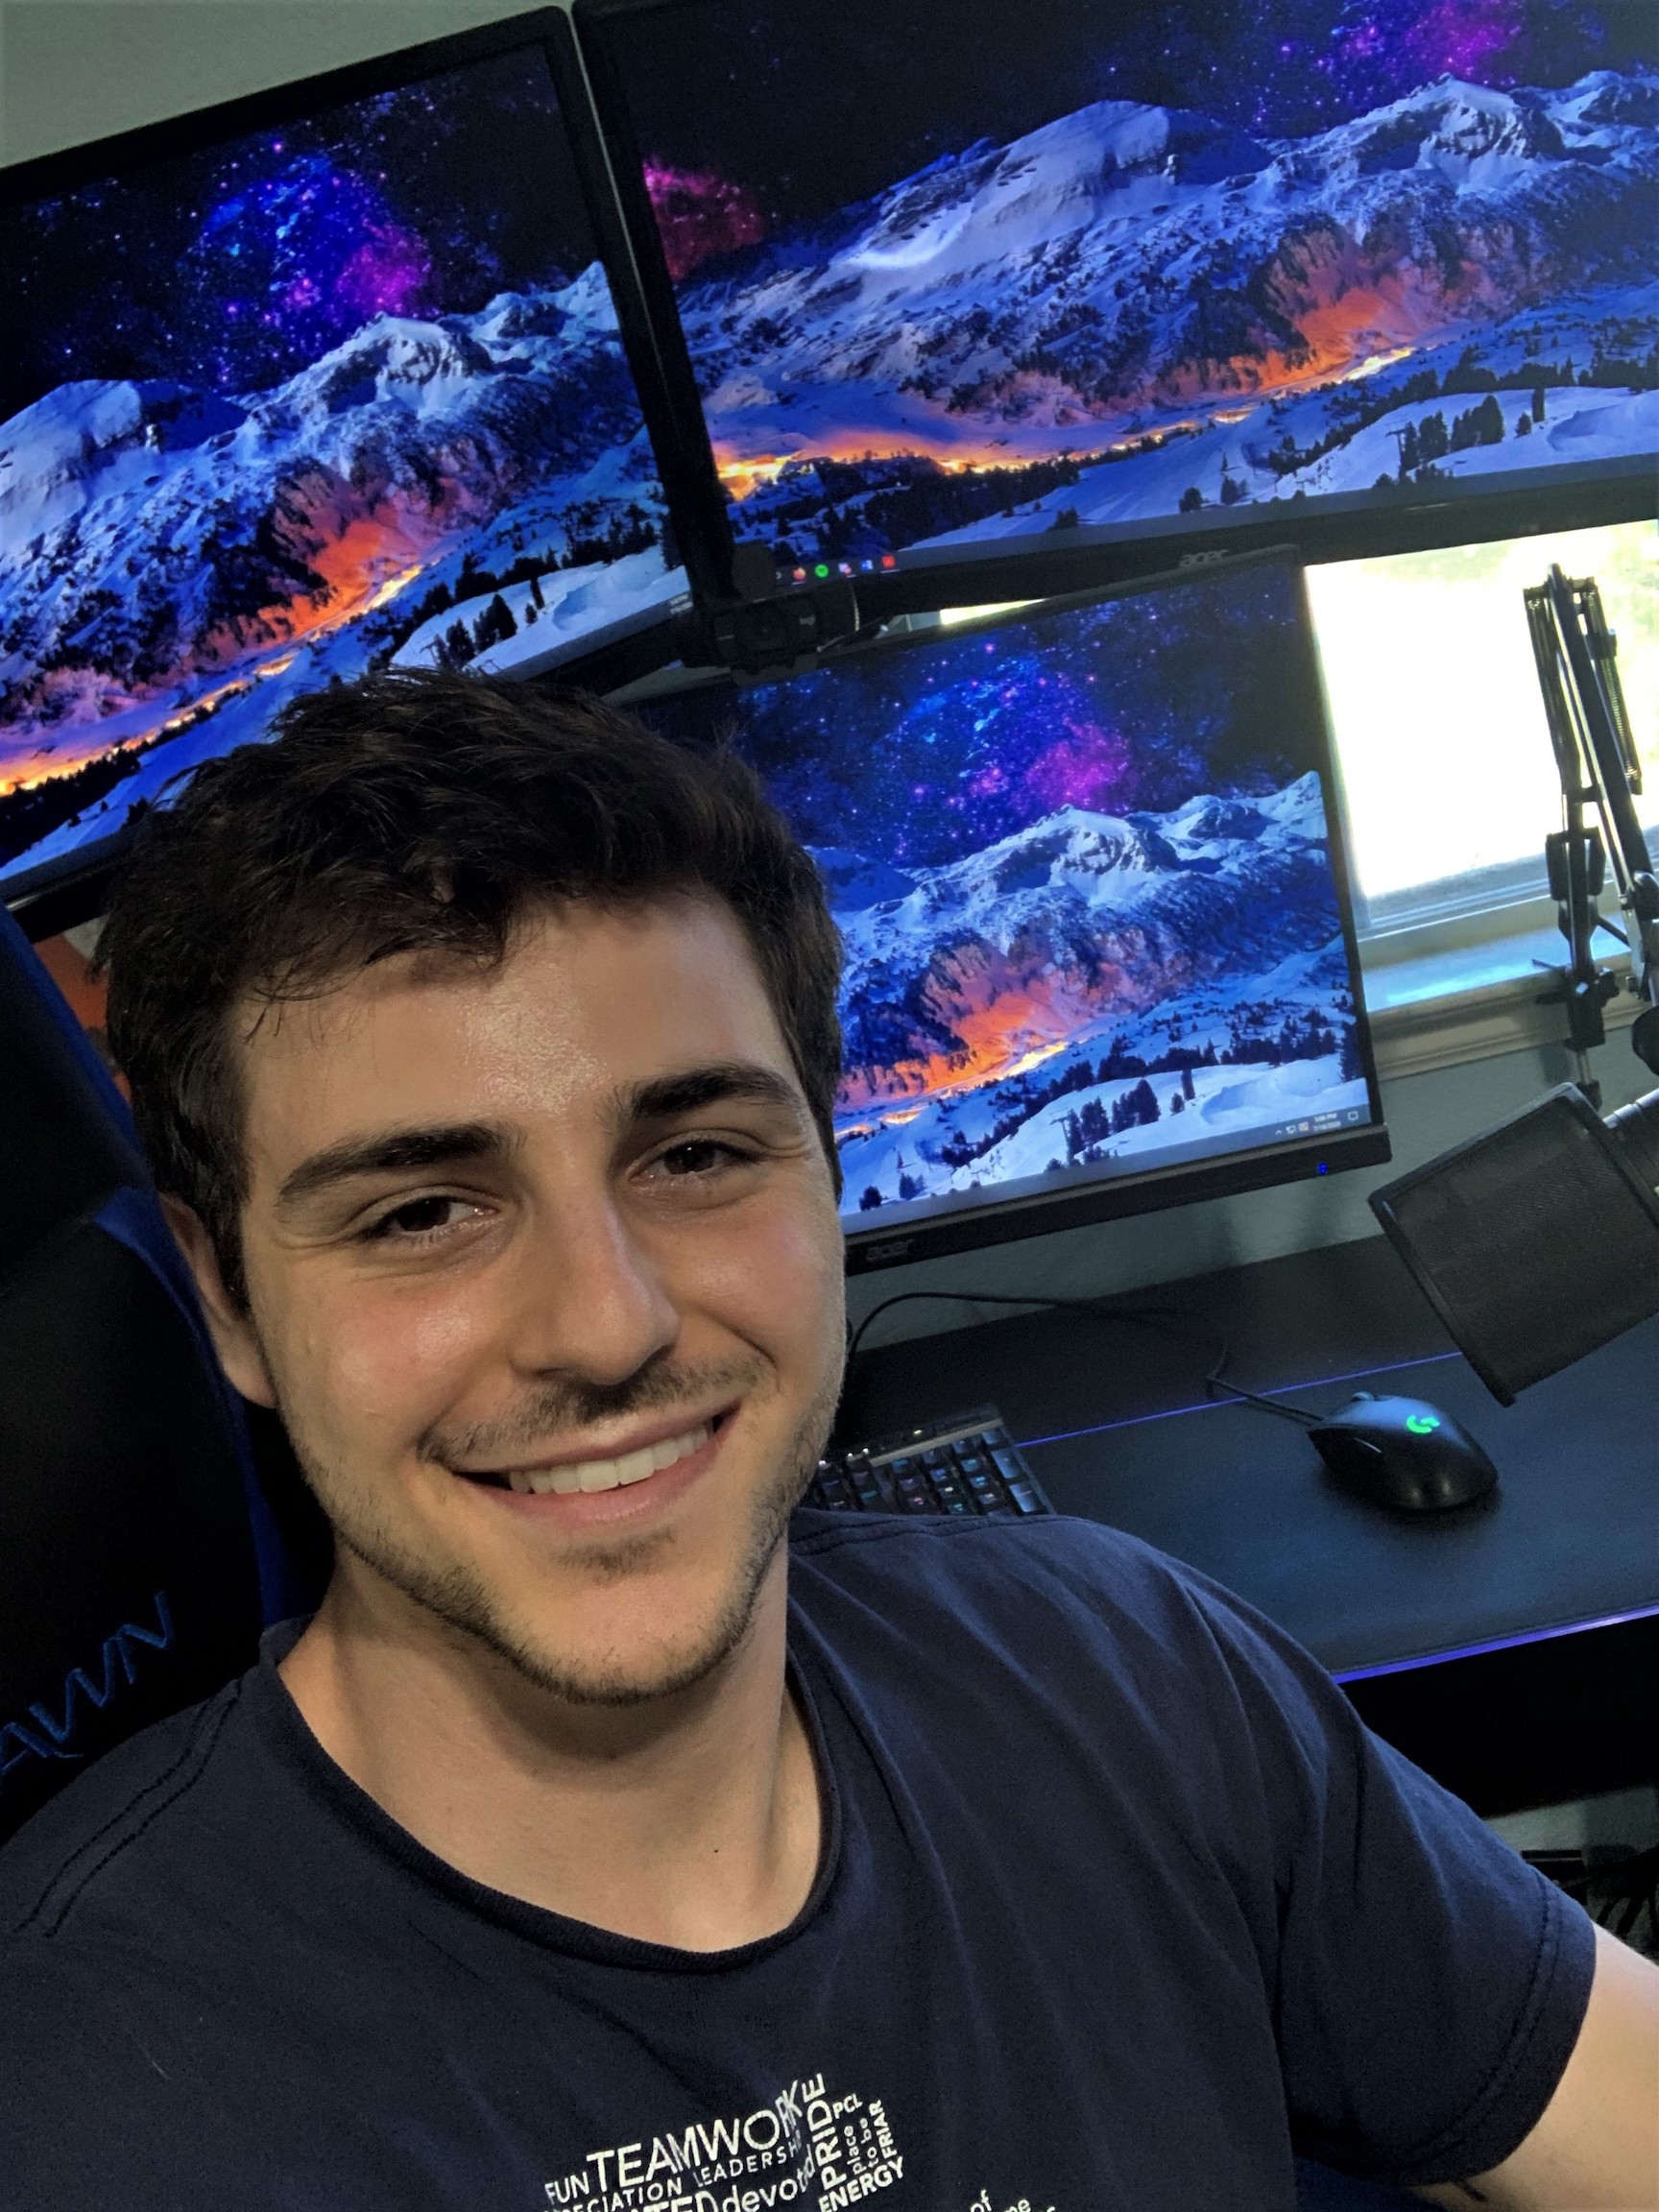 Sam Litrenta at his home office with his custom PC set-up that he built and installed himself. He uses this set-up to analyze stock charts and trade stocks/options.